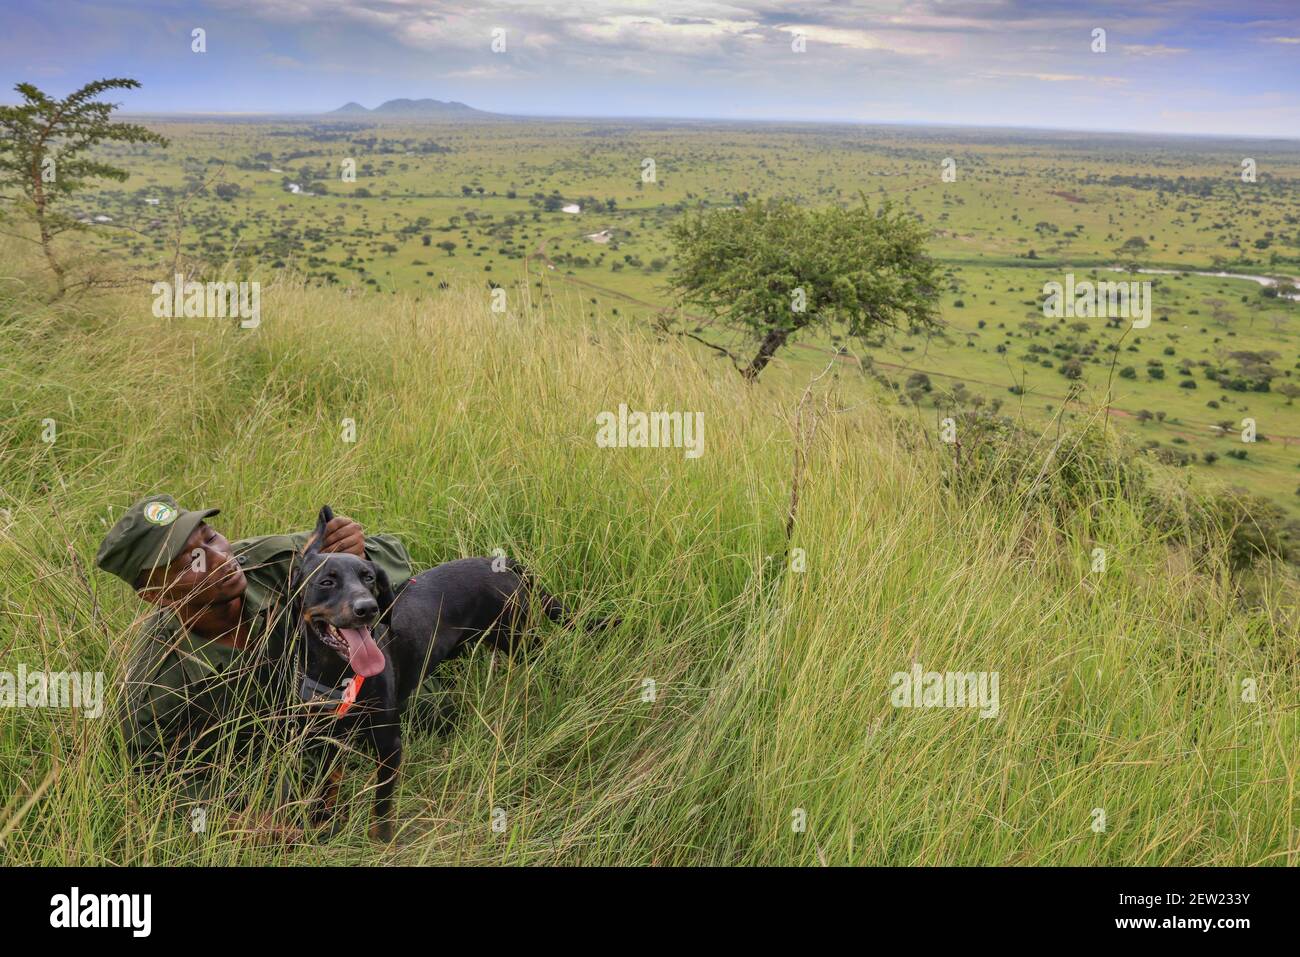 Tanzania, Serengeti National Park, Ikoma, The K9 unit is out, a little tender moment between the dogs and the handlers, there is a great bond between them, visible at all times of the day Stock Photo